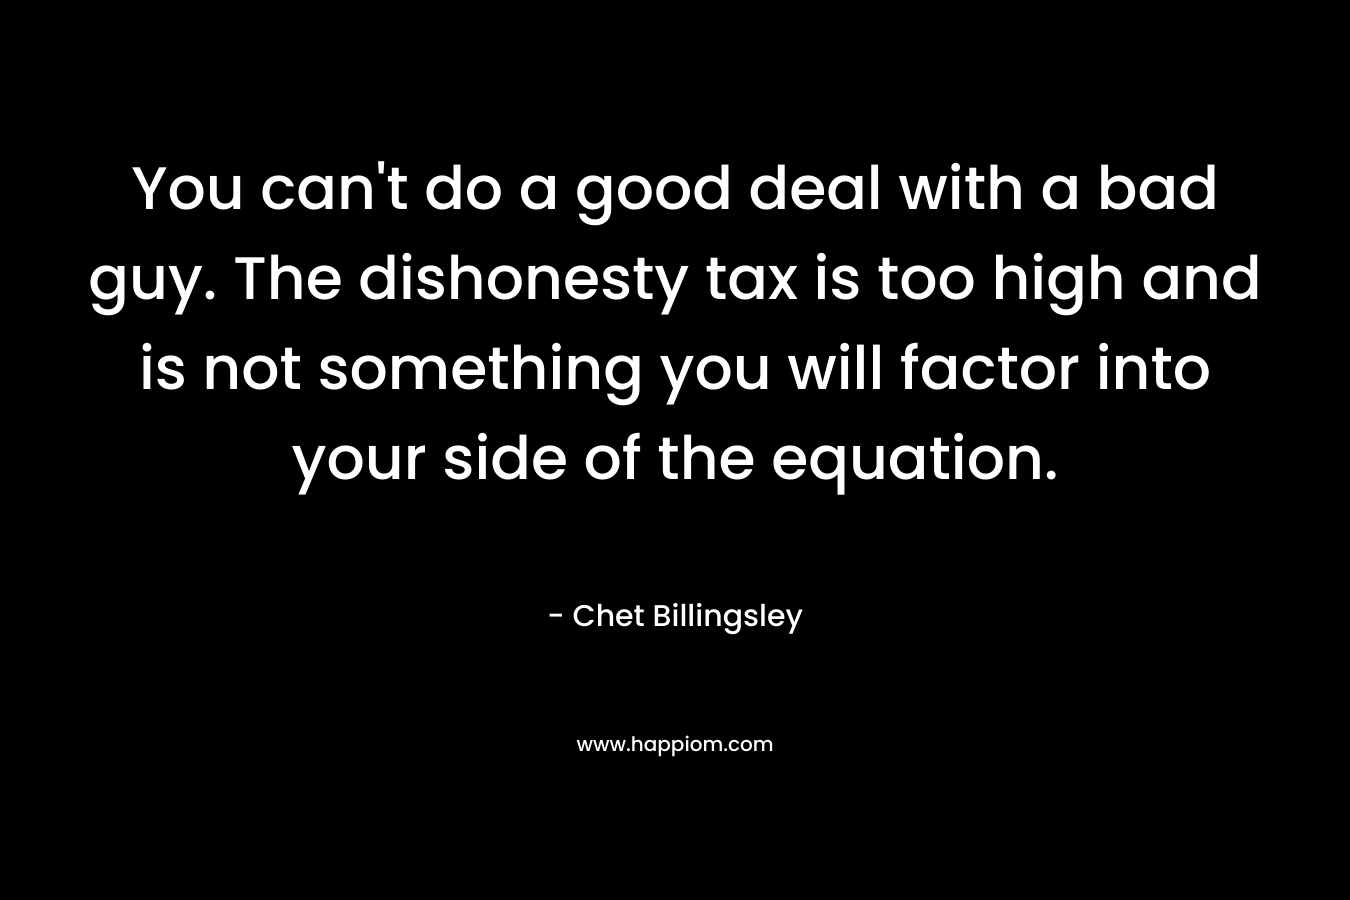 You can't do a good deal with a bad guy. The dishonesty tax is too high and is not something you will factor into your side of the equation.